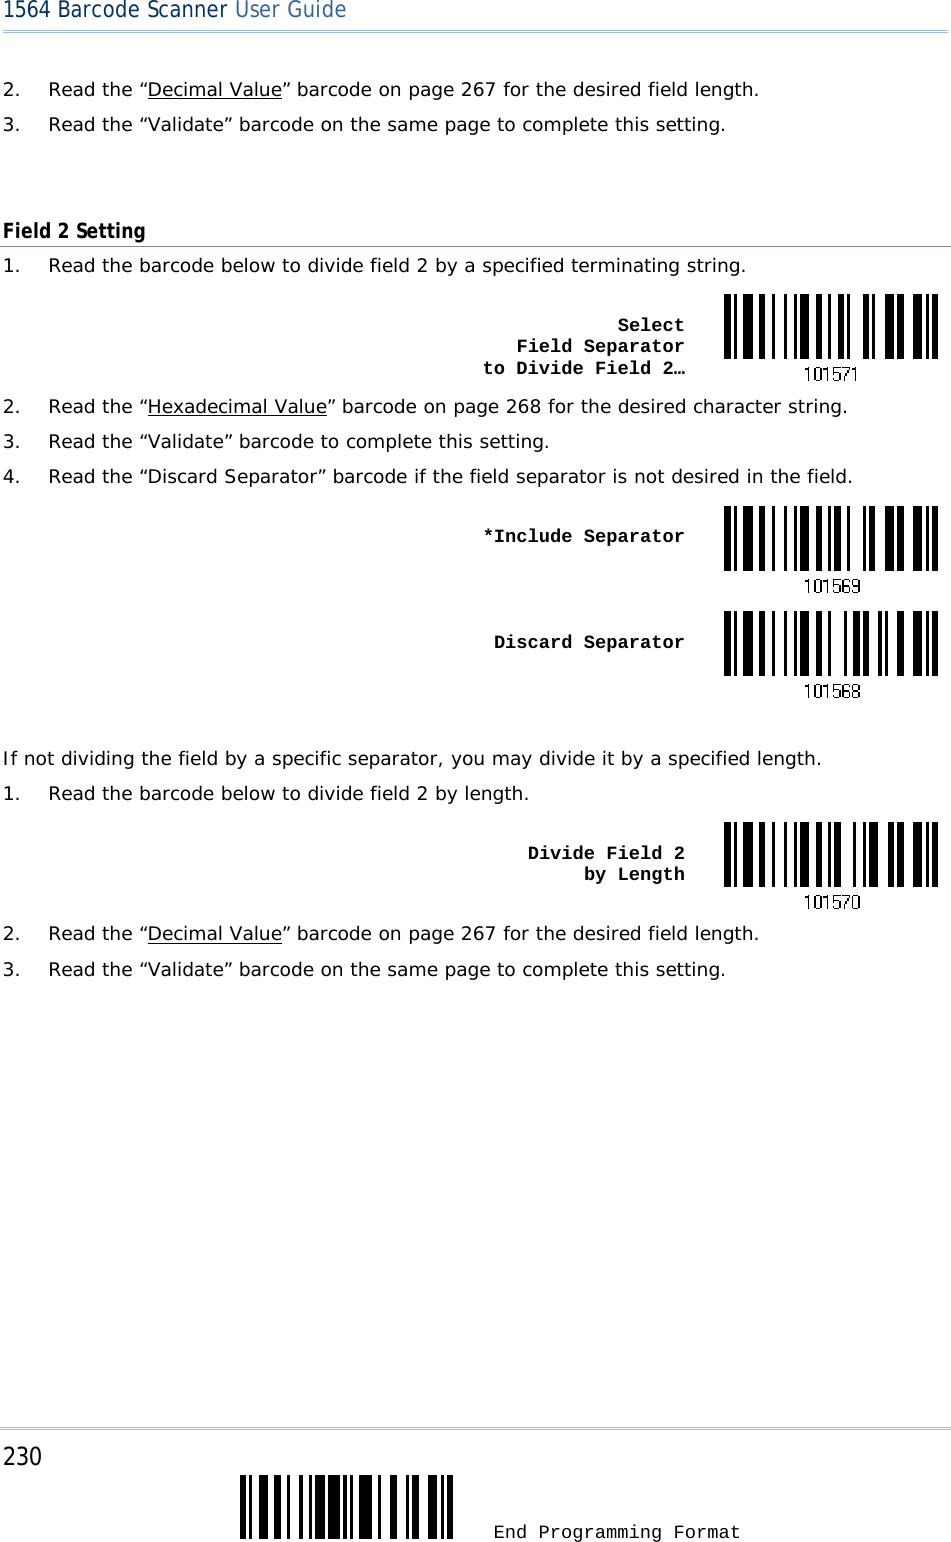 230  End Programming Format 1564 Barcode Scanner User Guide  2.  Read the “Decimal Value” barcode on page 267 for the desired field length. 3.  Read the “Validate” barcode on the same page to complete this setting.   Field 2 Setting 1.  Read the barcode below to divide field 2 by a specified terminating string.  Select  Field Separator  to Divide Field 2…2.  Read the “Hexadecimal Value” barcode on page 268 for the desired character string. 3.  Read the “Validate” barcode to complete this setting. 4.  Read the “Discard Separator” barcode if the field separator is not desired in the field.  *Include Separator Discard Separator If not dividing the field by a specific separator, you may divide it by a specified length. 1.  Read the barcode below to divide field 2 by length.  Divide Field 2  by Length2.  Read the “Decimal Value” barcode on page 267 for the desired field length. 3.  Read the “Validate” barcode on the same page to complete this setting.         